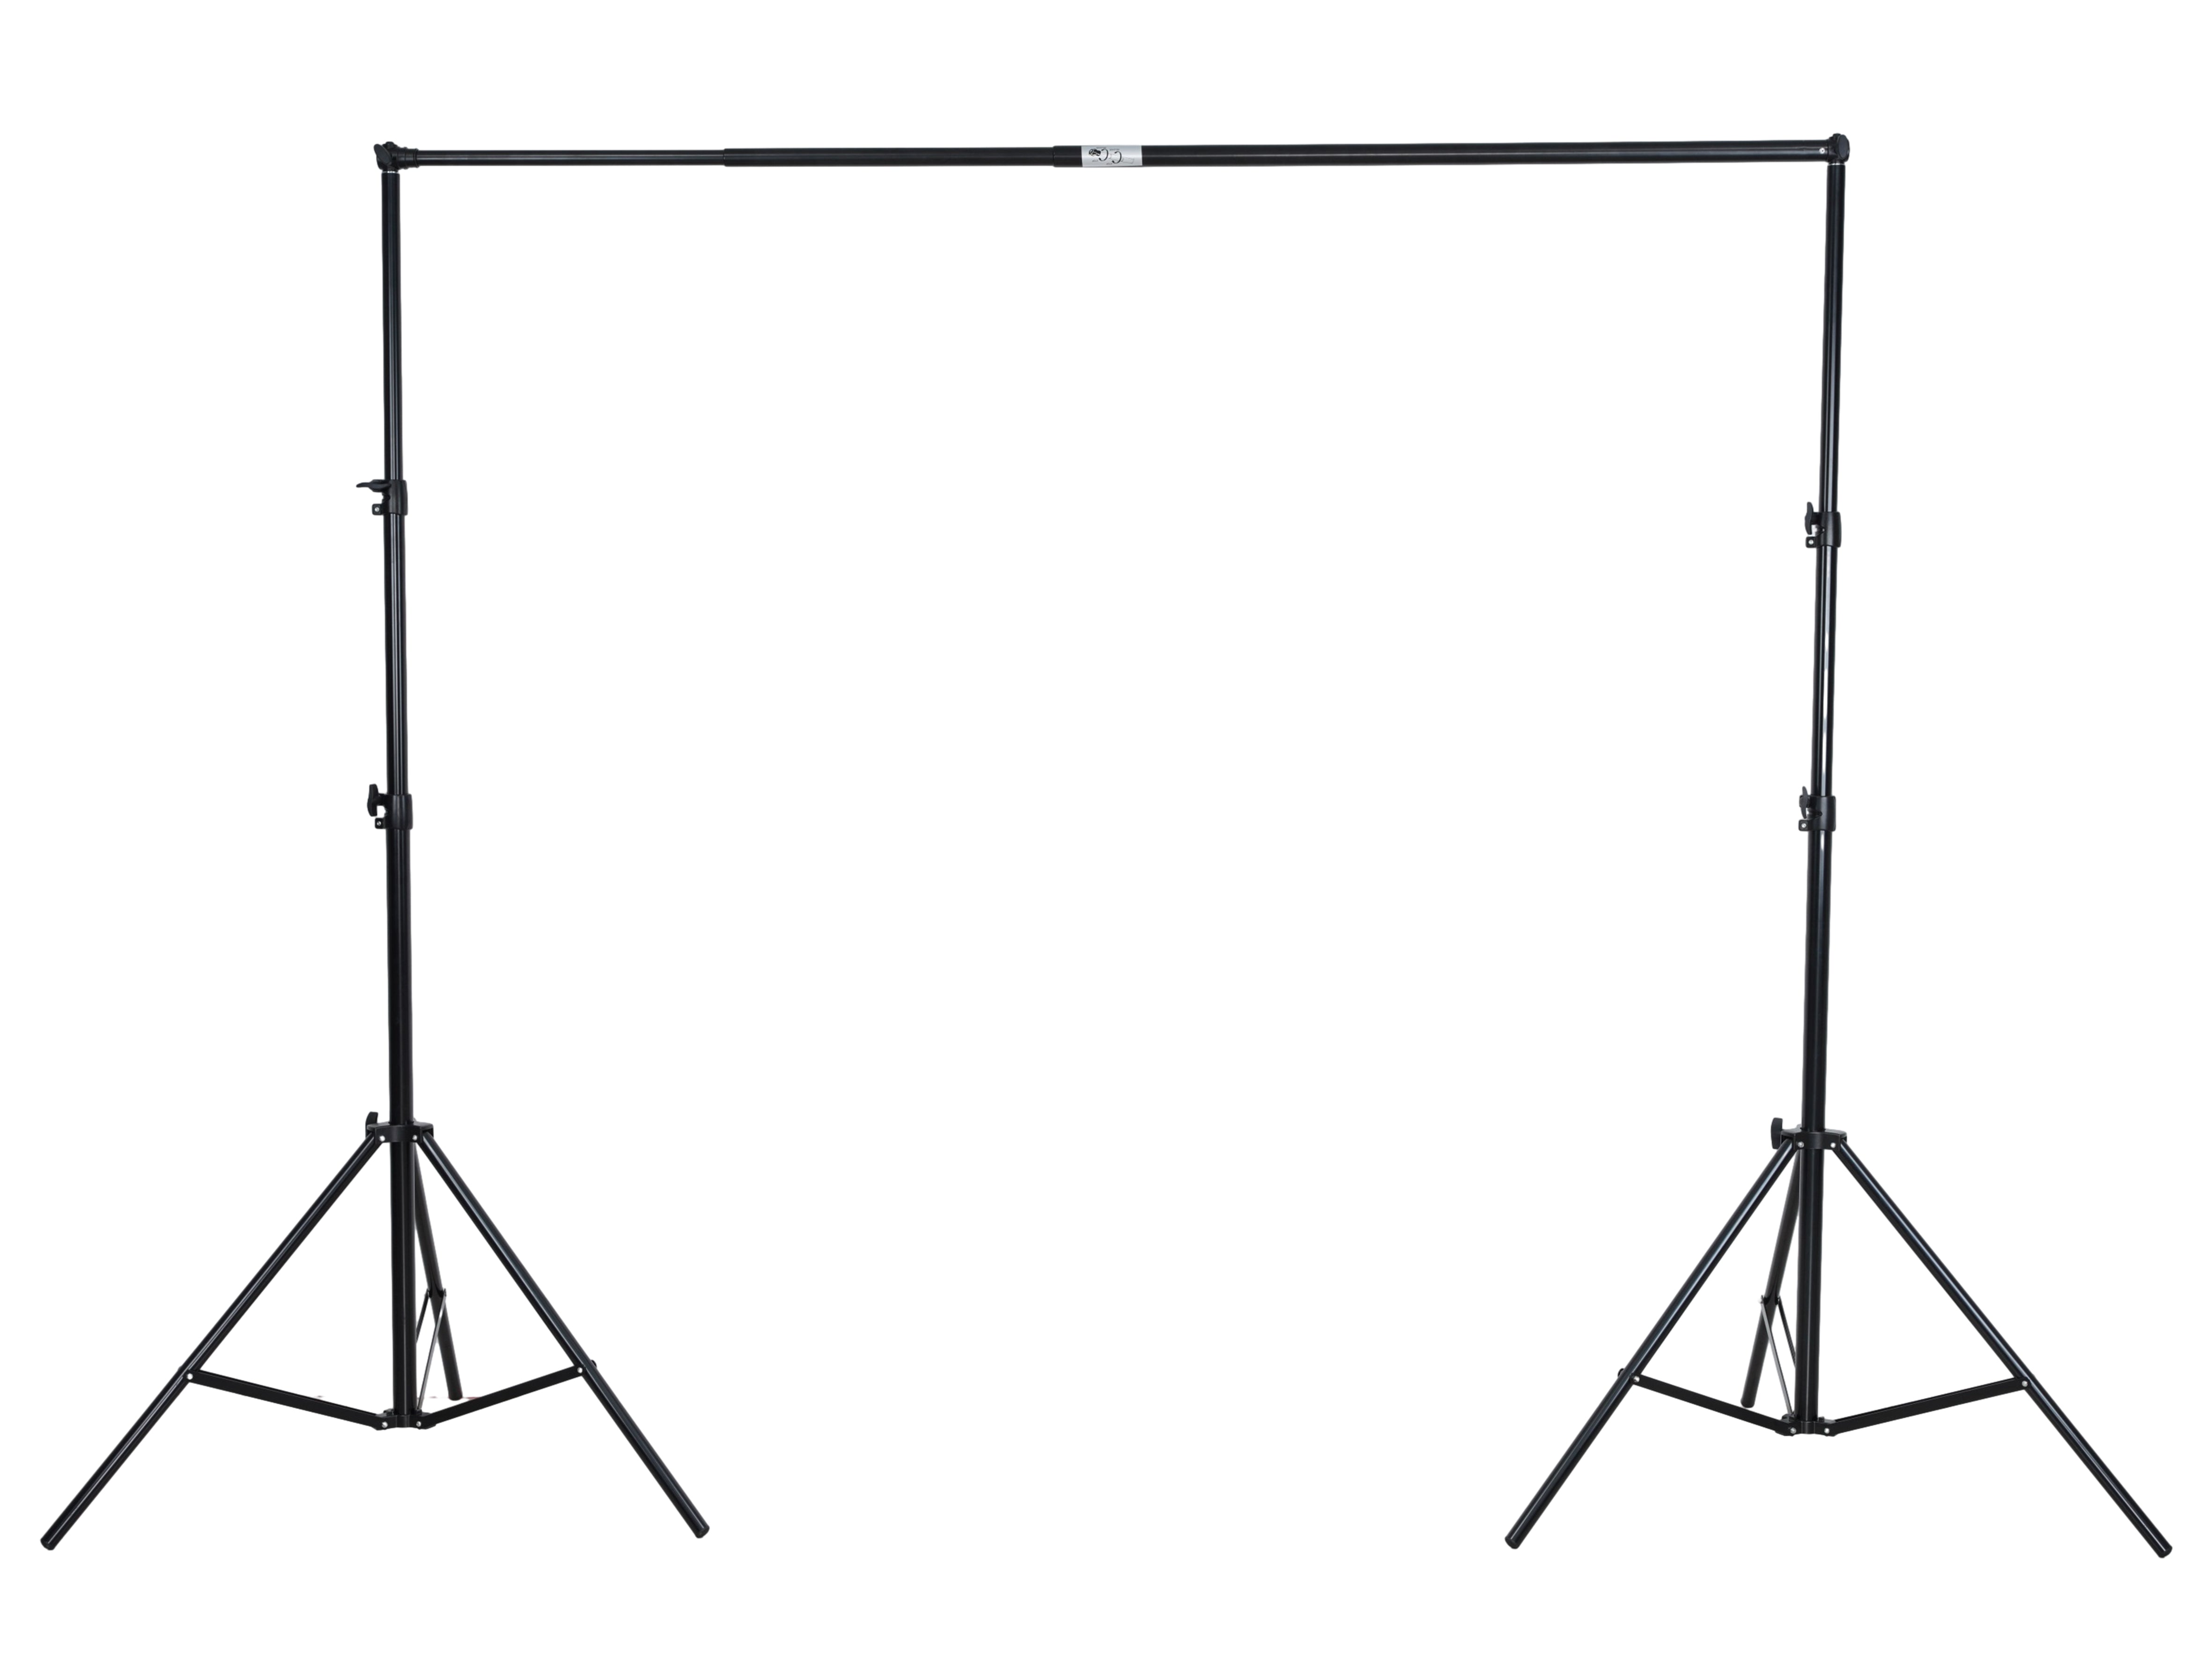 Kate 3x2.8m Adjustable Frame Kit Stand for Photography